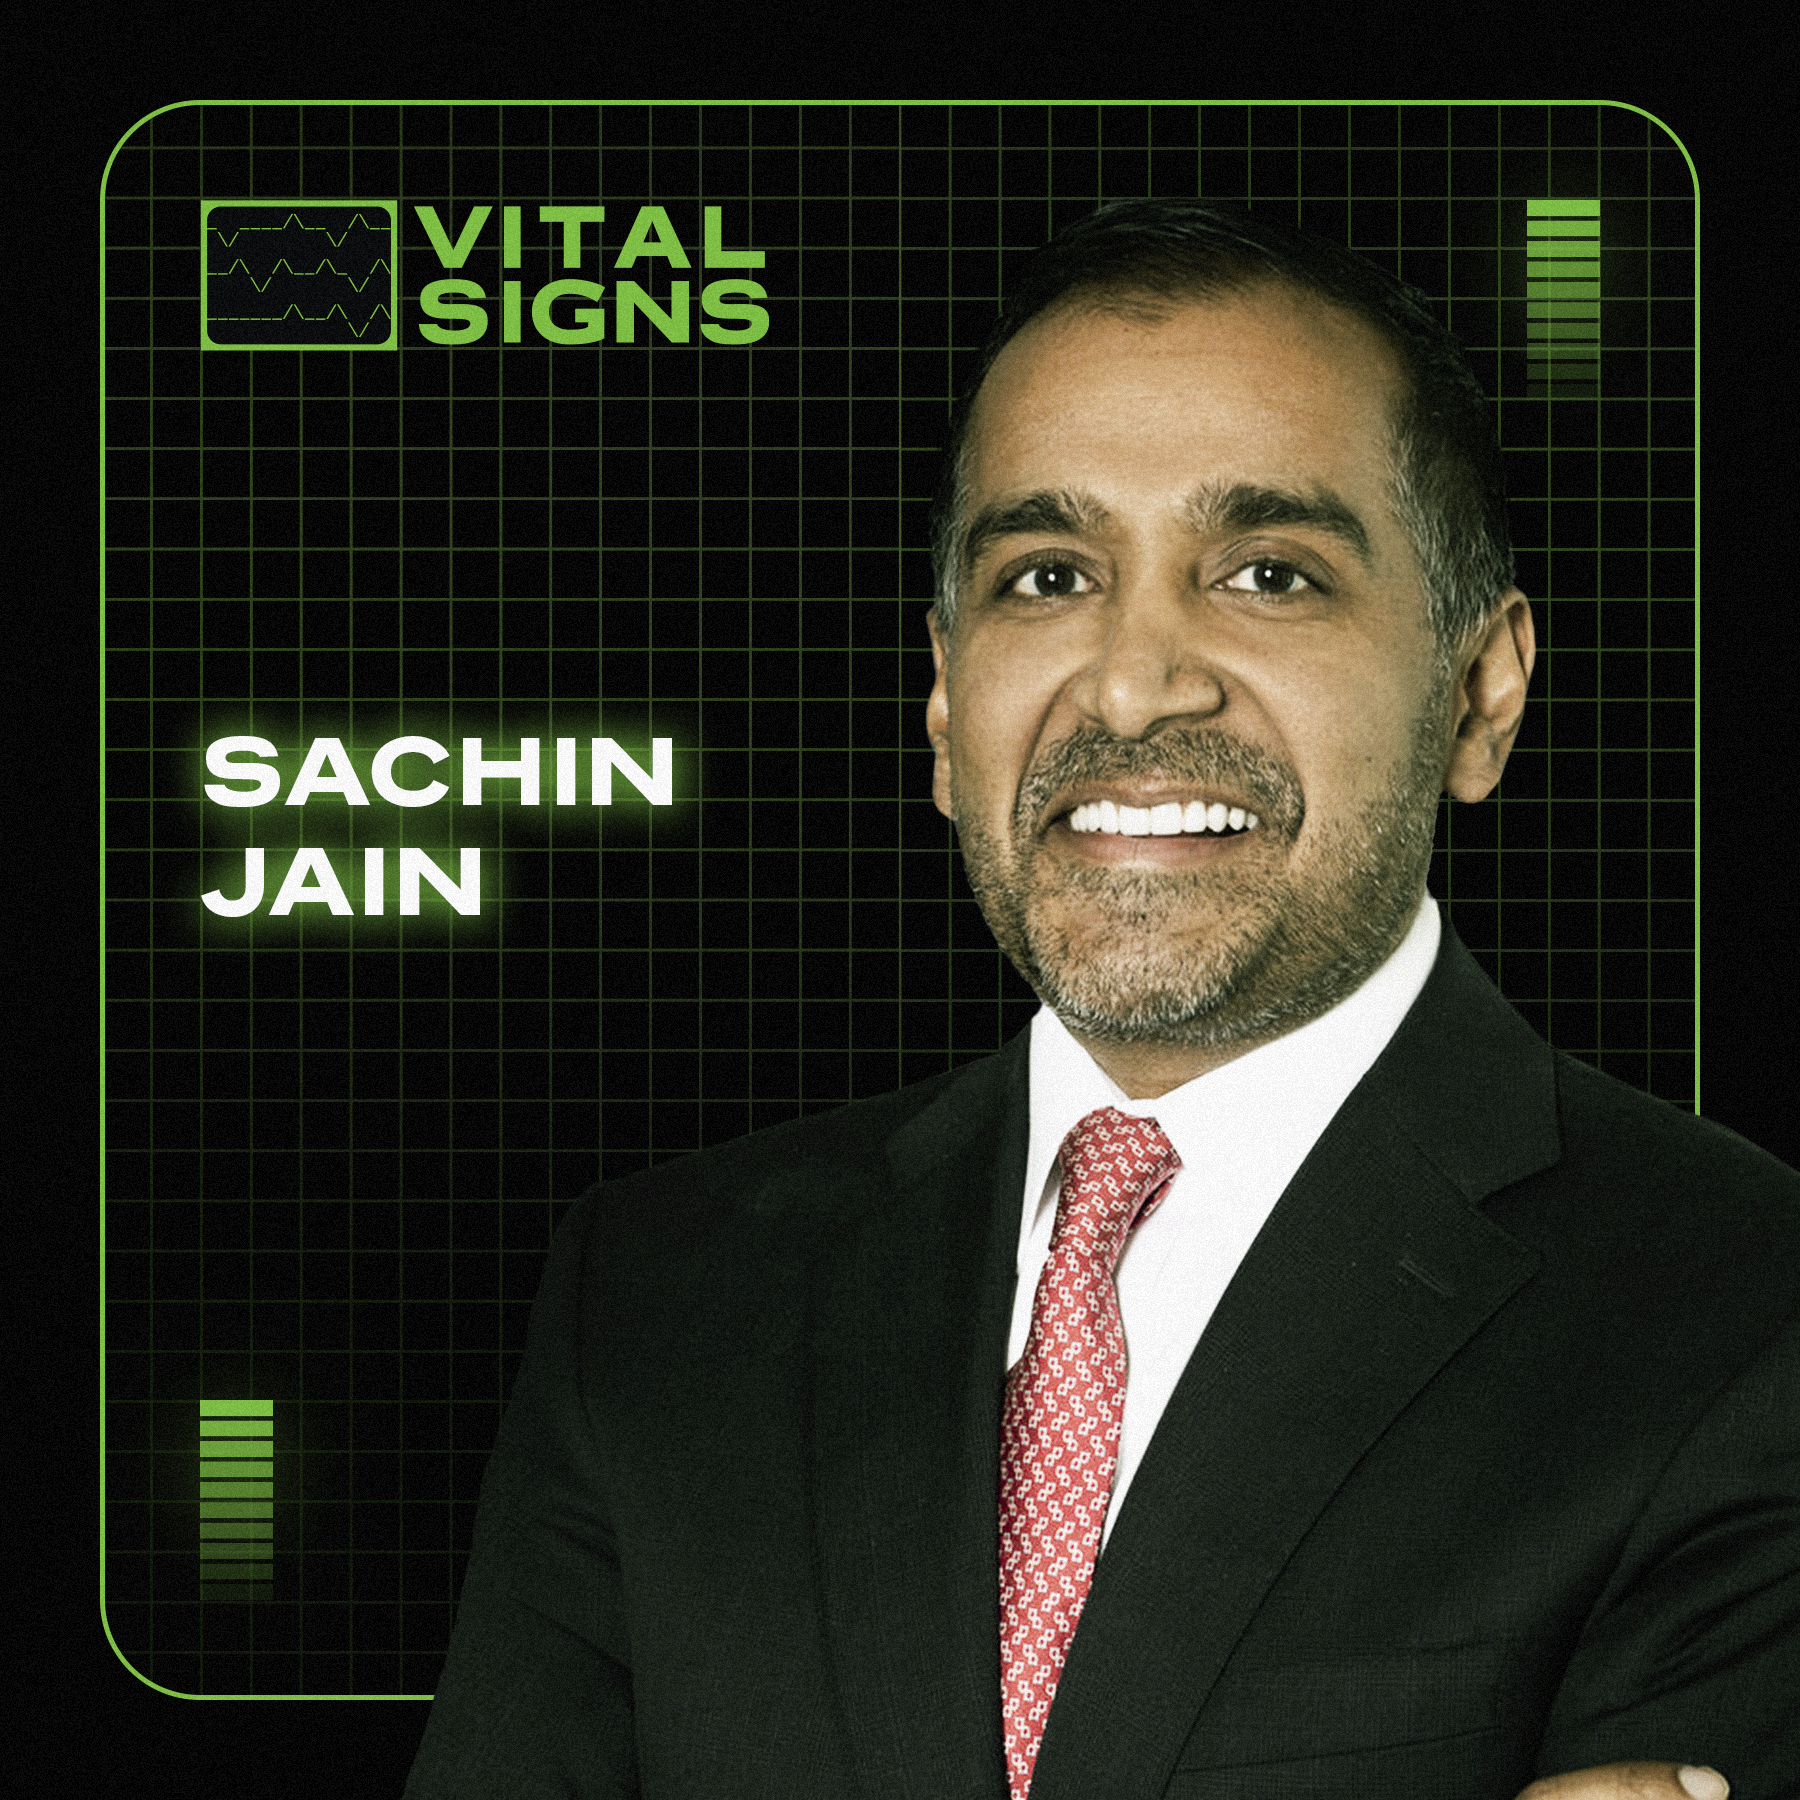  Ep 8: Dr. Sachin Jain on Incubating Businesses and Why Health Systems Will Drive Value-Based Care